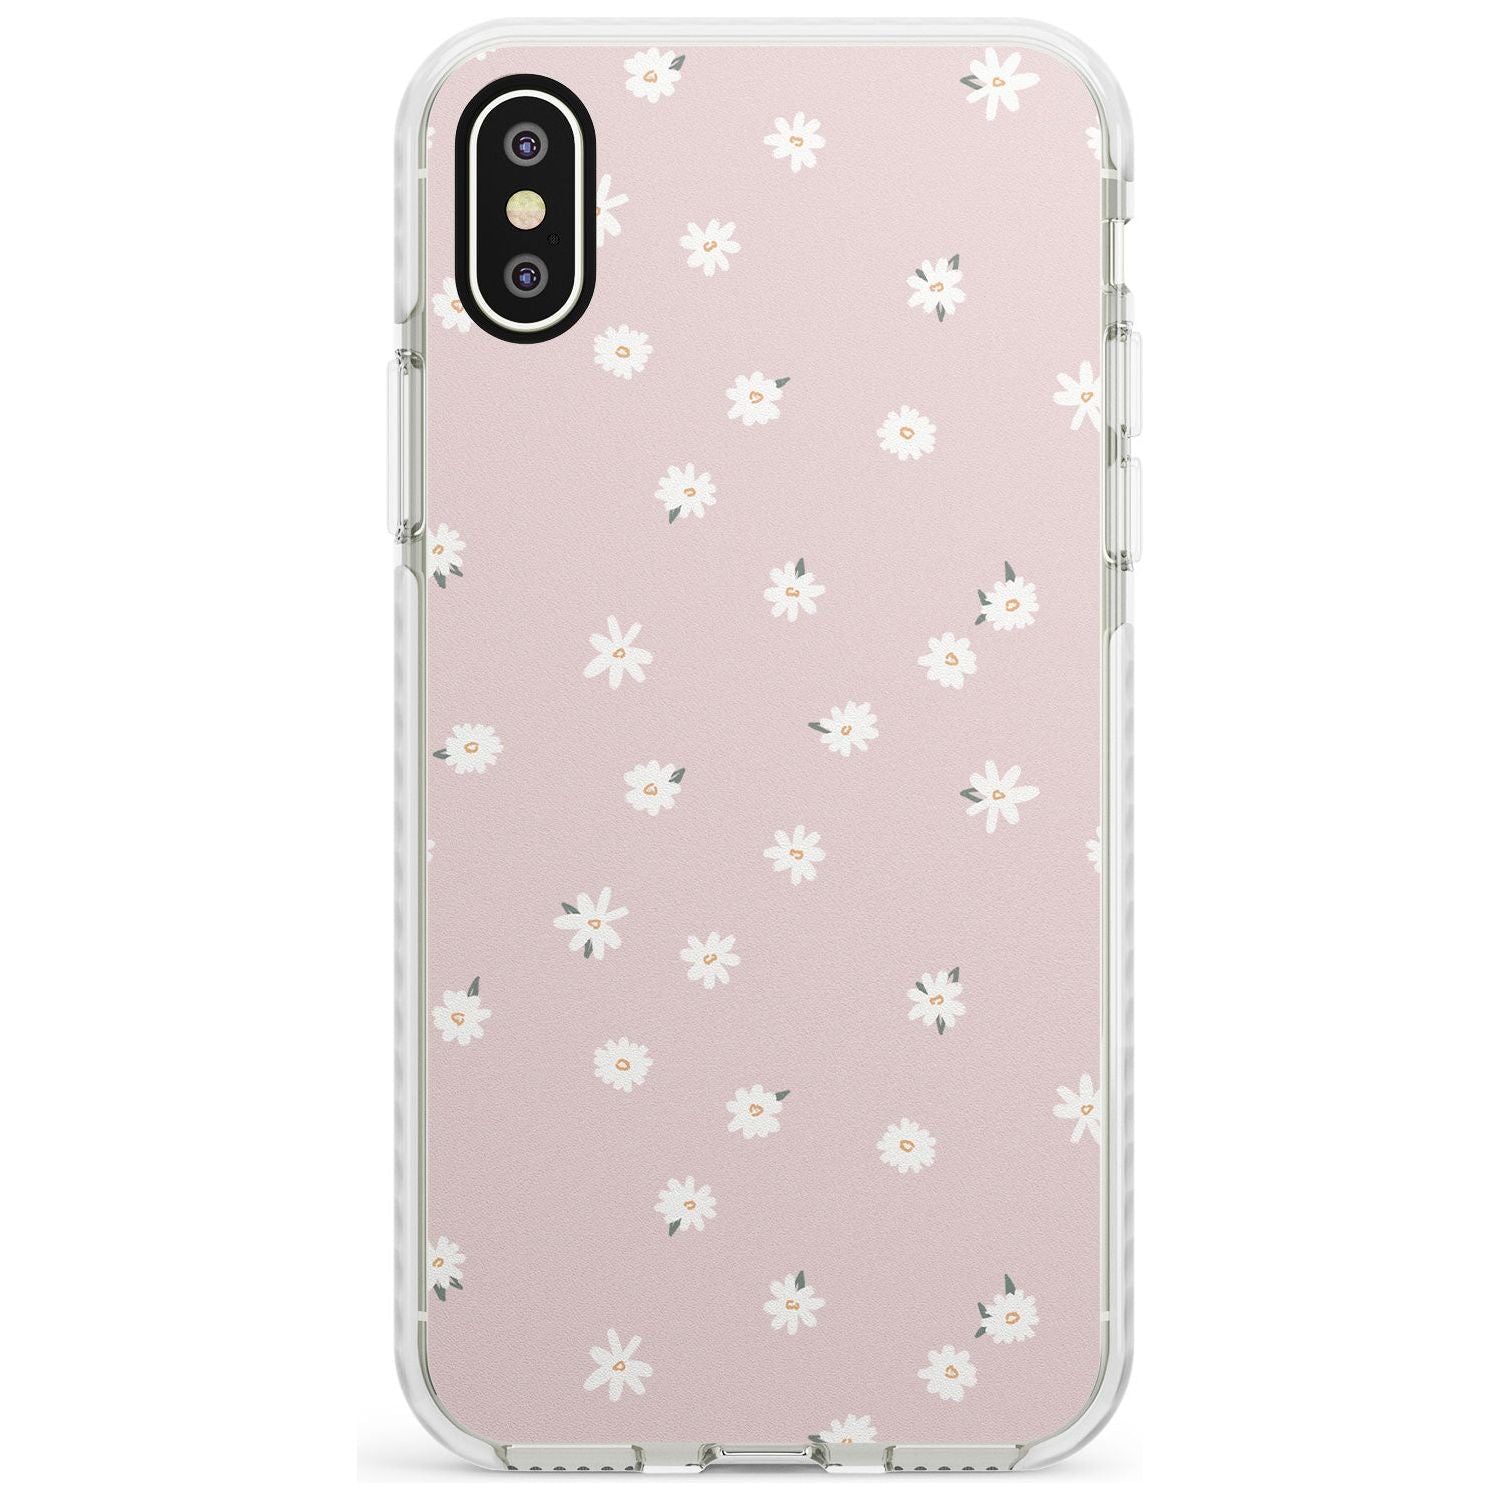 Painted Daises on Pink - Cute Floral Daisy Design Slim TPU Phone Case Warehouse X XS Max XR